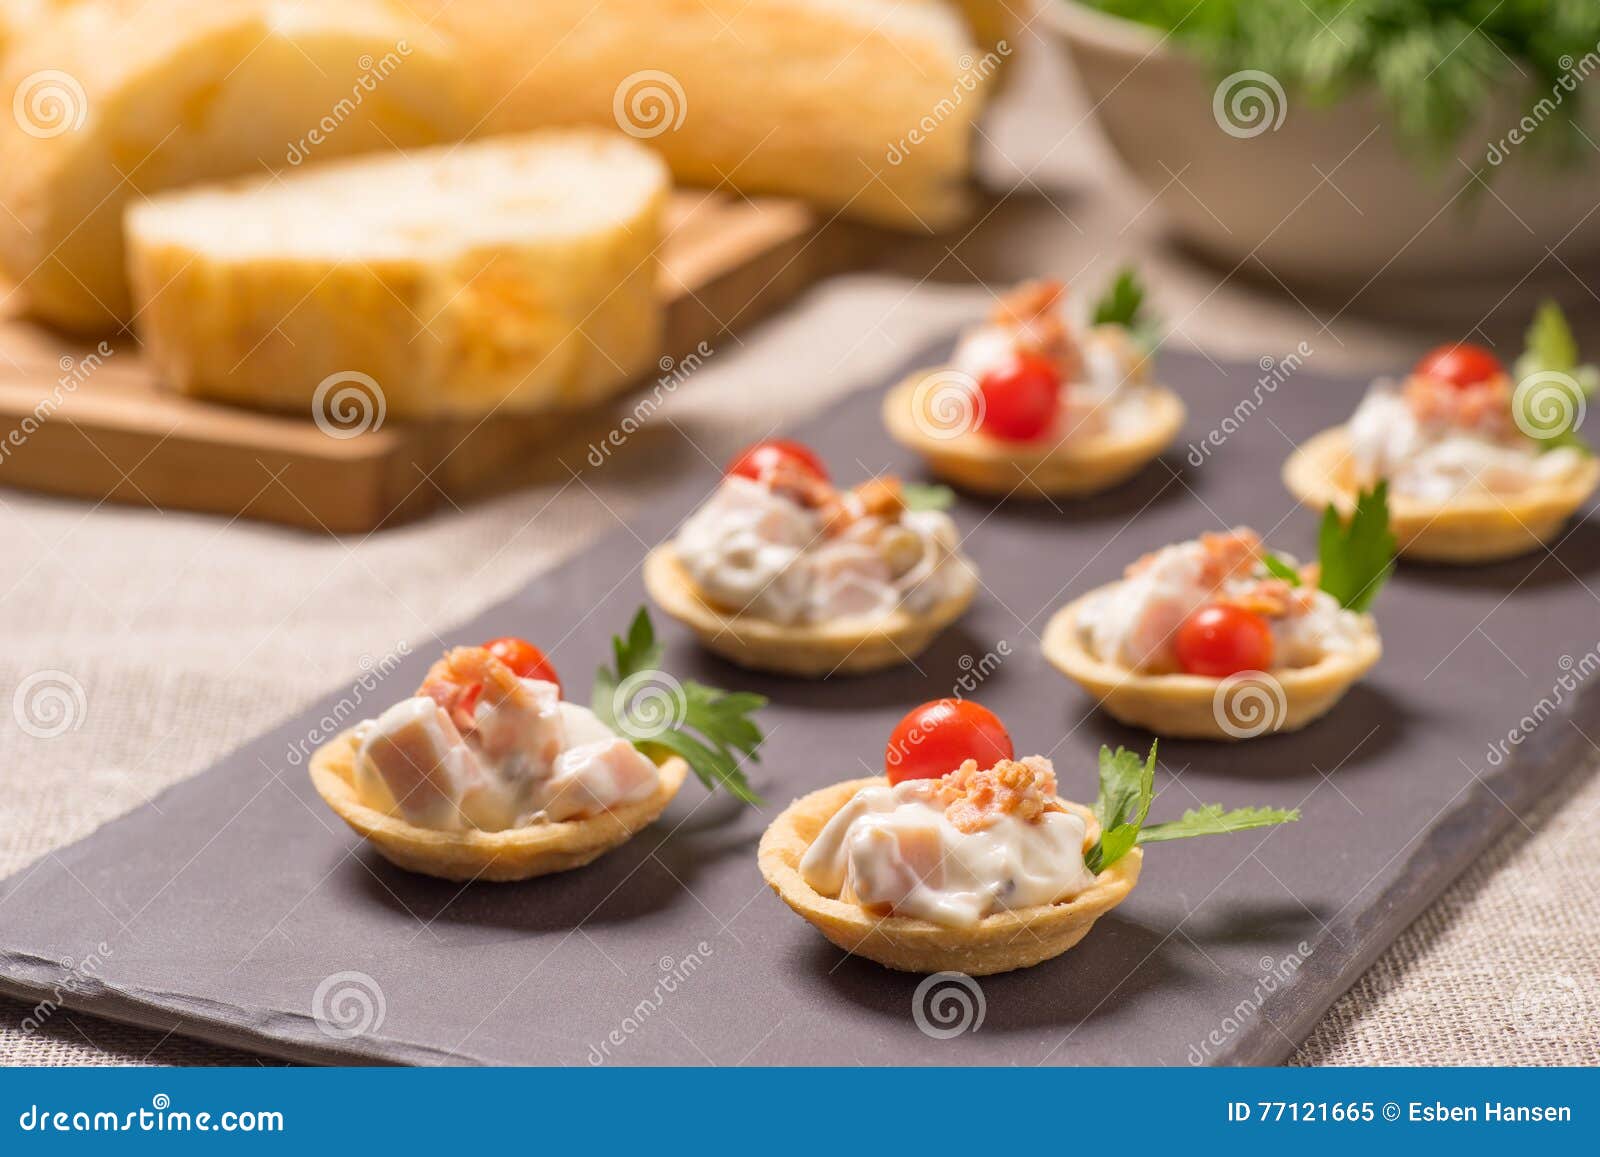 Canapes Appetizer With Creamy Chicken Salad Stock Photo Image intended for The Incredible  chicken salad appetizers for Motivate